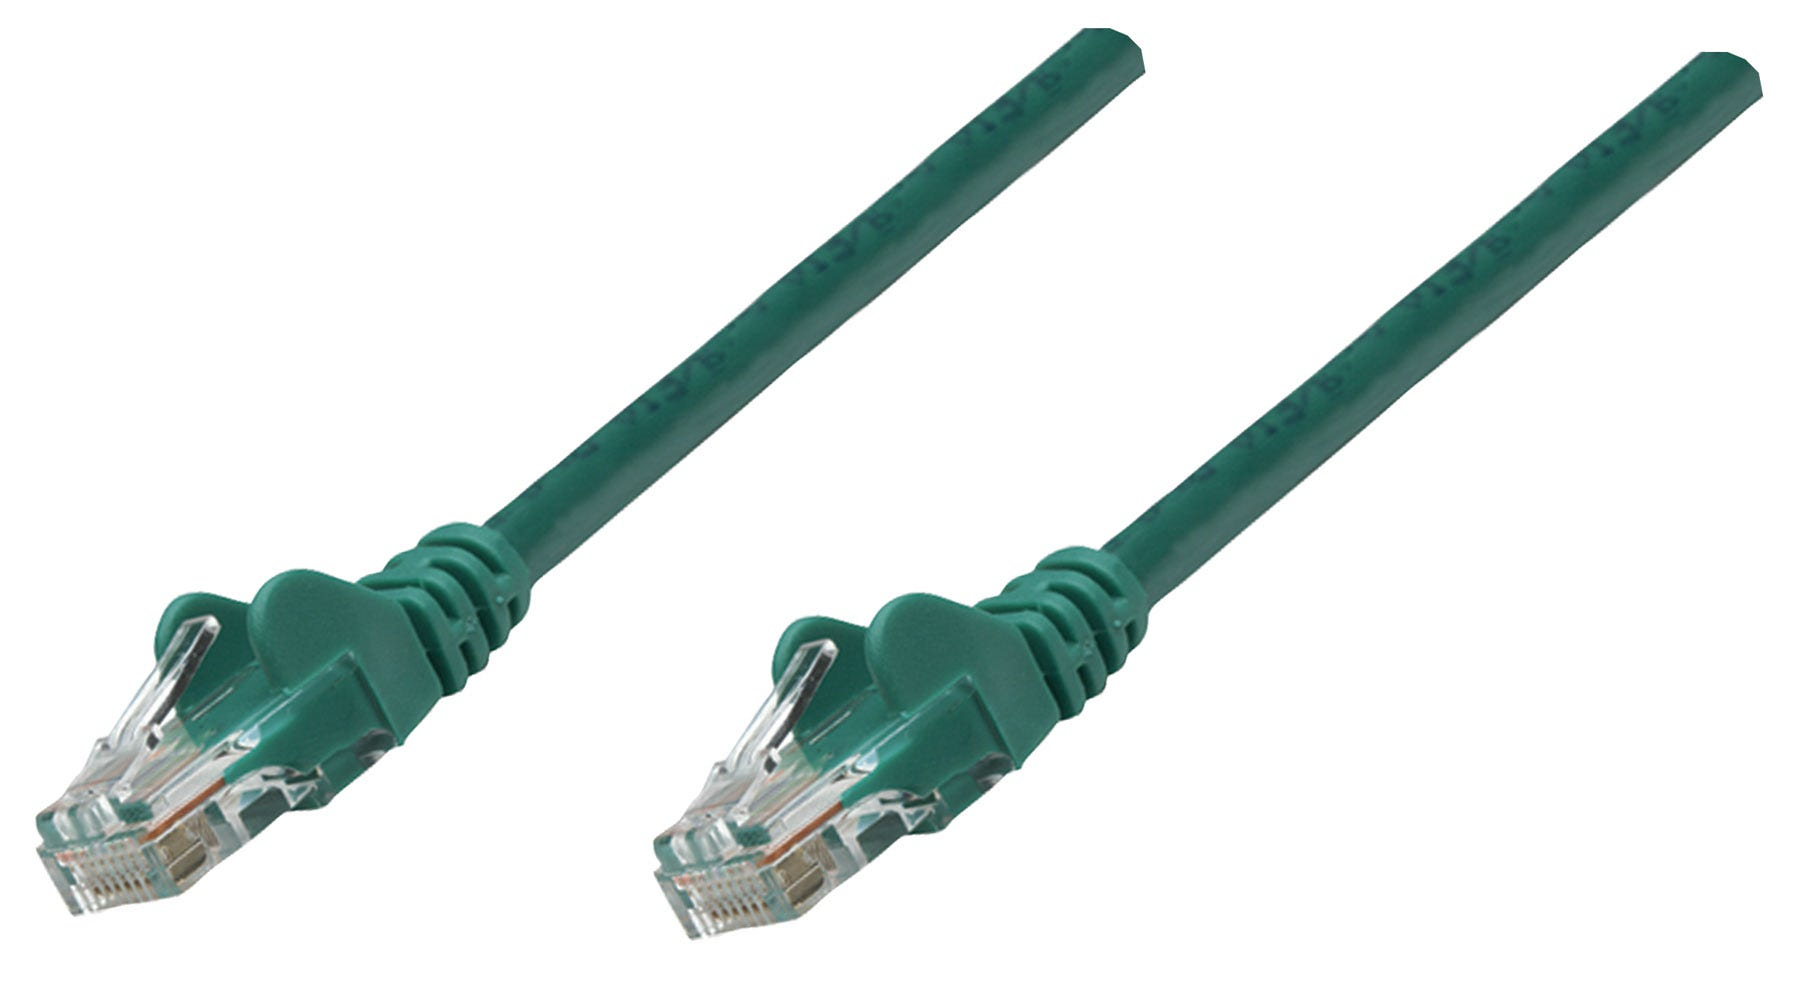 Photos - Cable (video, audio, USB) INTELLINET Network Patch Cable, Cat6, 0.25m, Green, CCA, U/UTP, PVC, R 730 